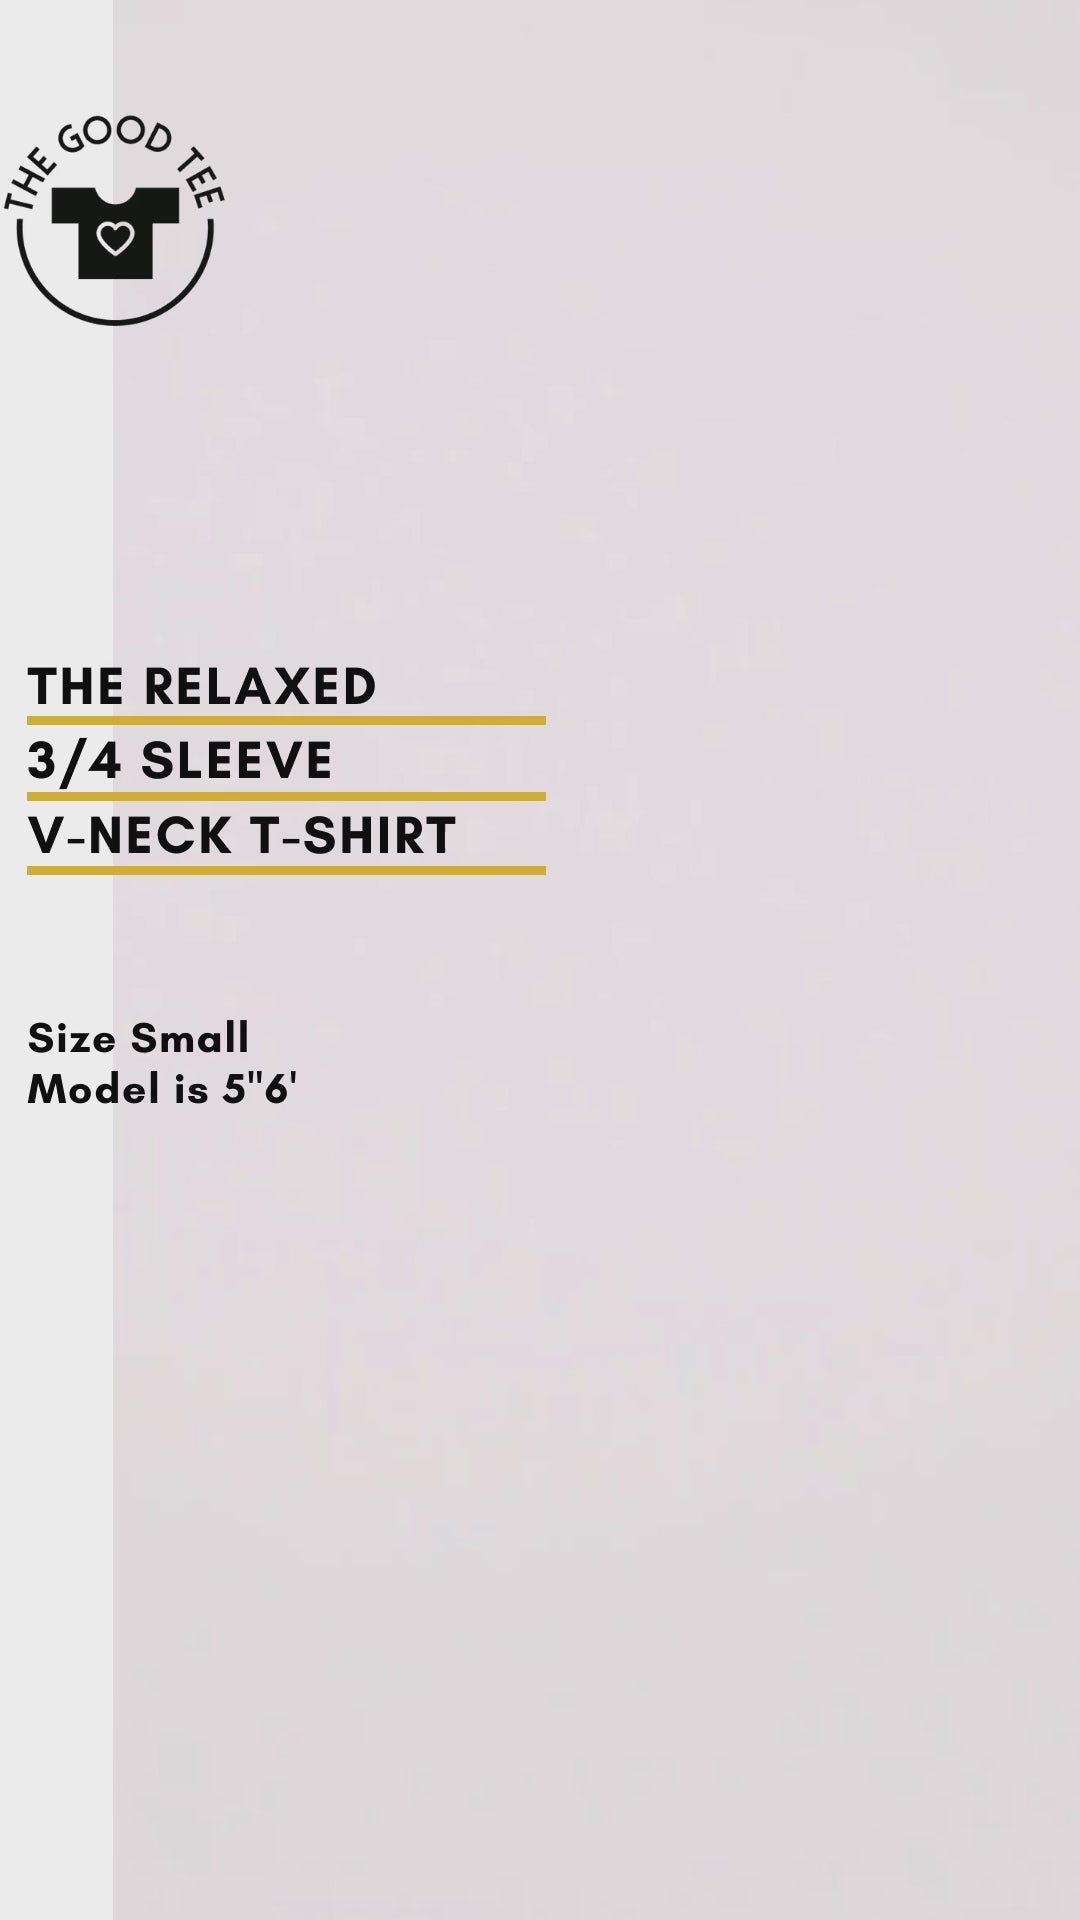 Responsible 3/4 Sleeve V-Neck T-Shirt (Clearance)